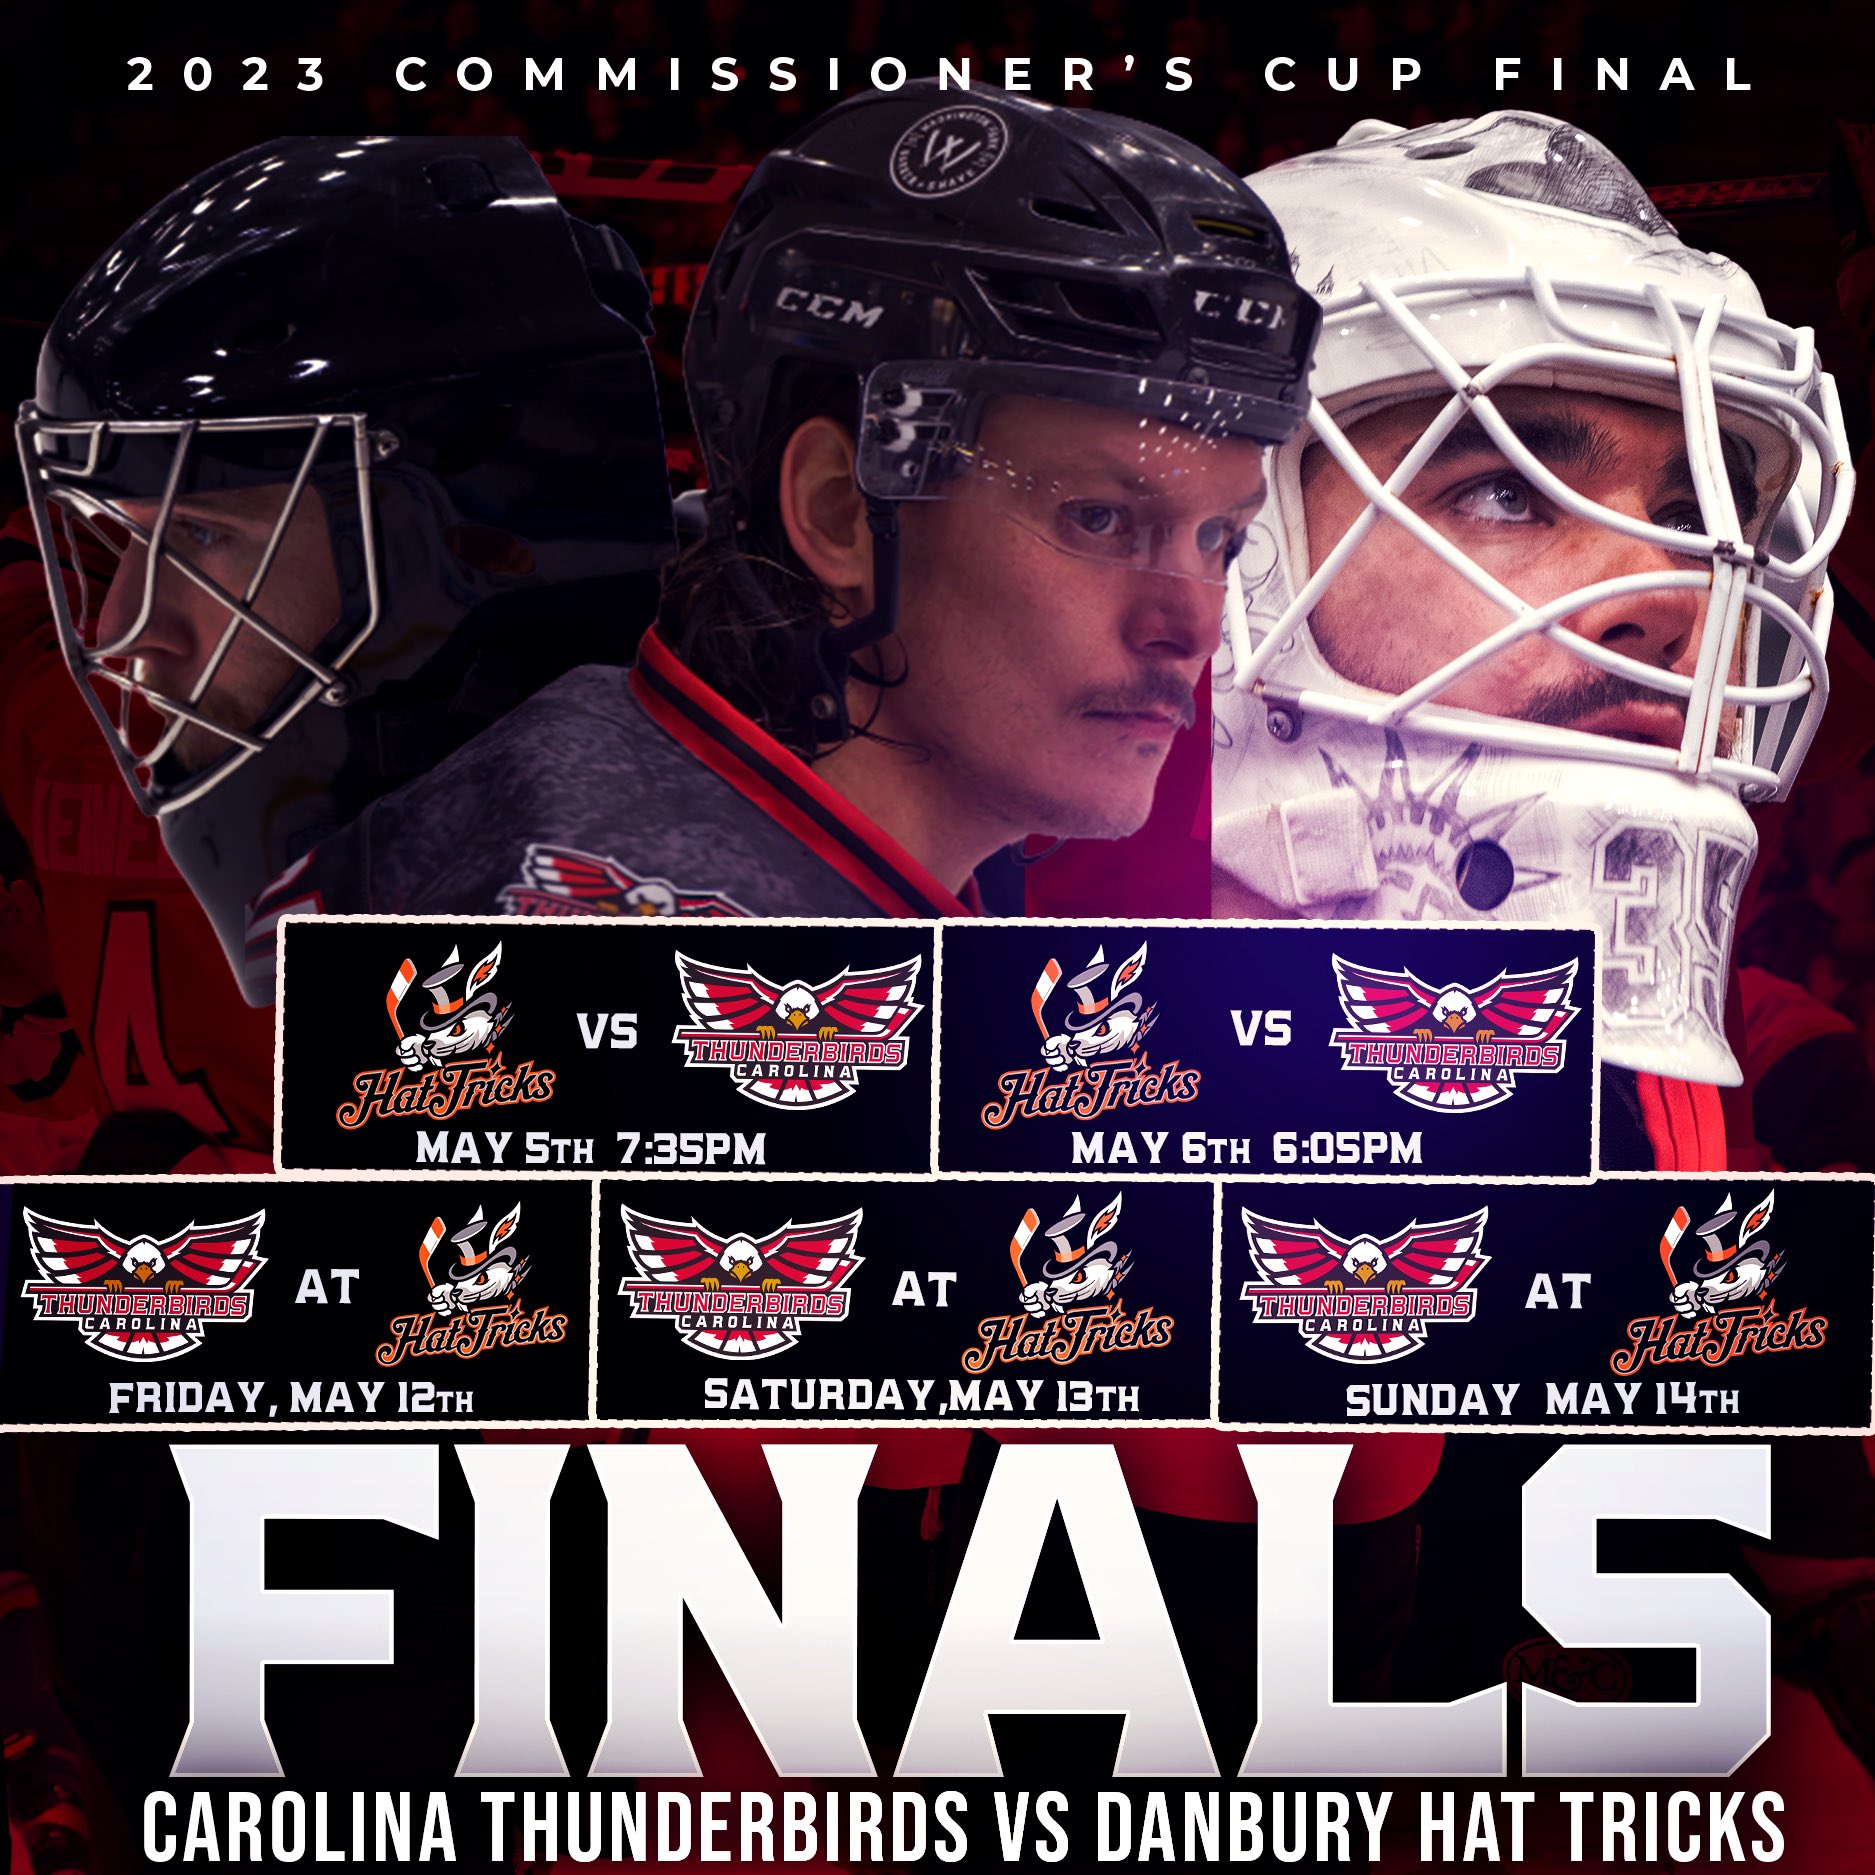 Carolina Thunderbirds on X: And right before playoffs, we all